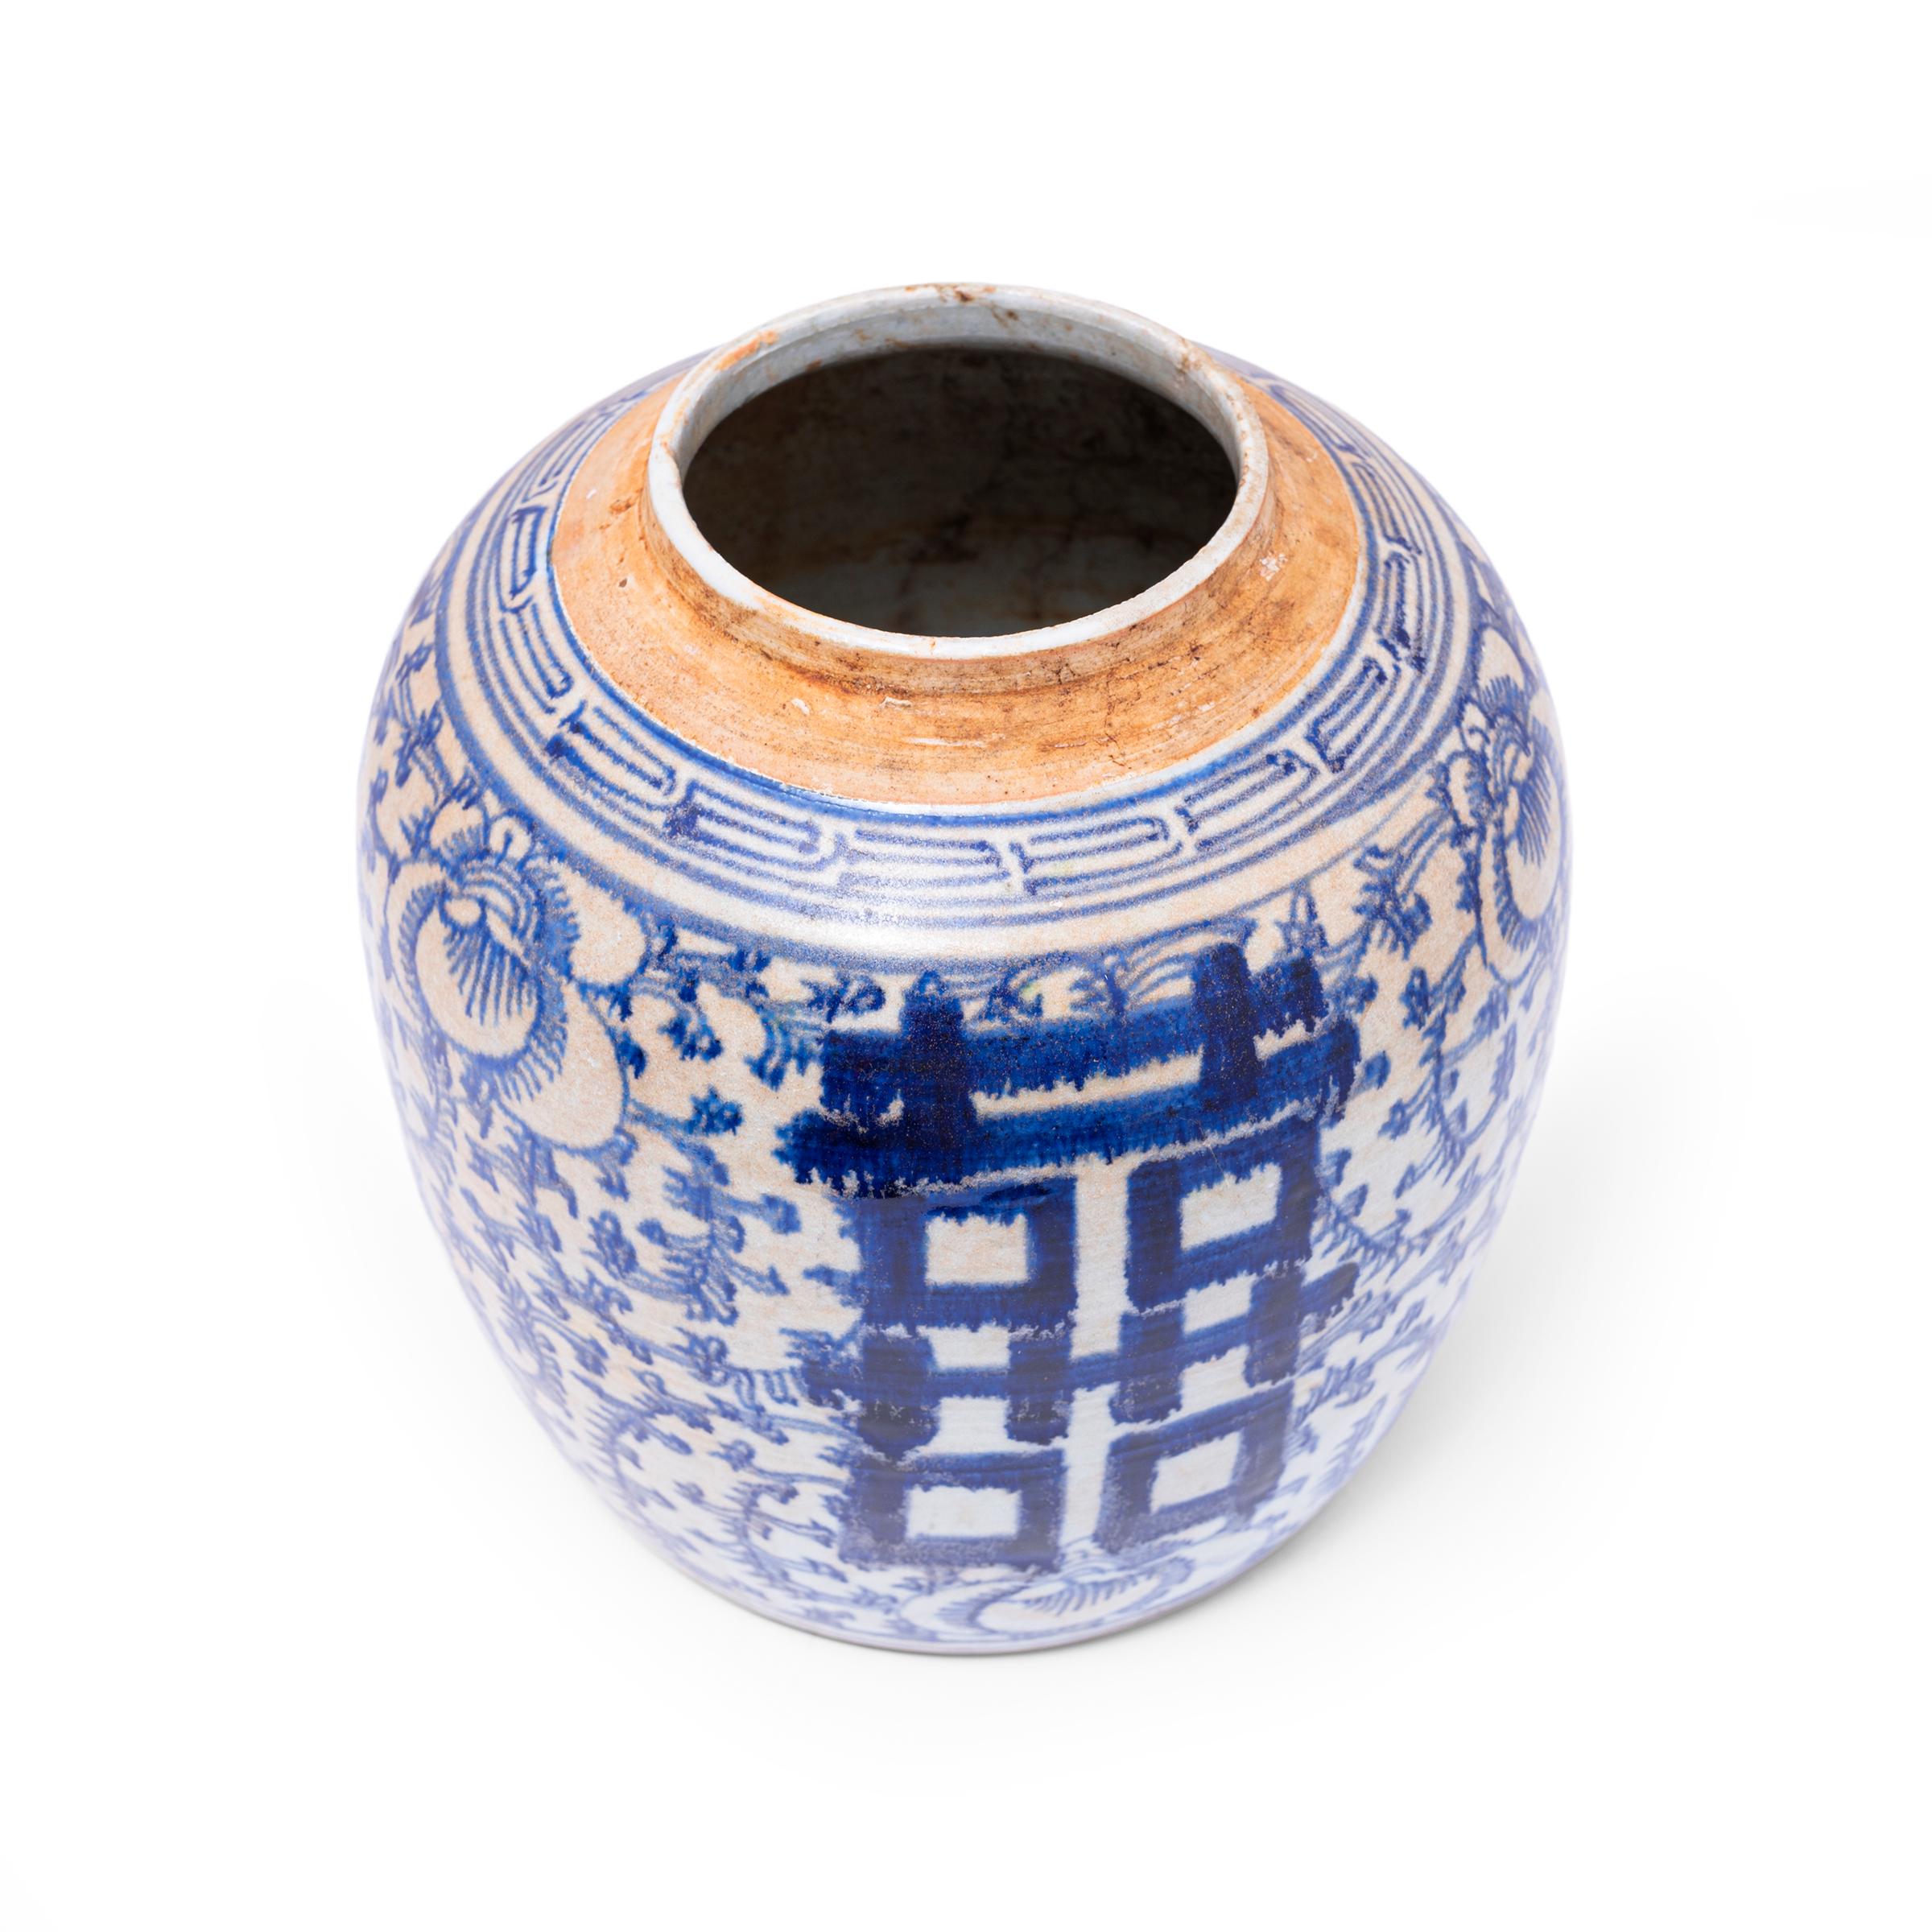 Qing Chinese Blue and White Double Happiness Jar, c. 1900